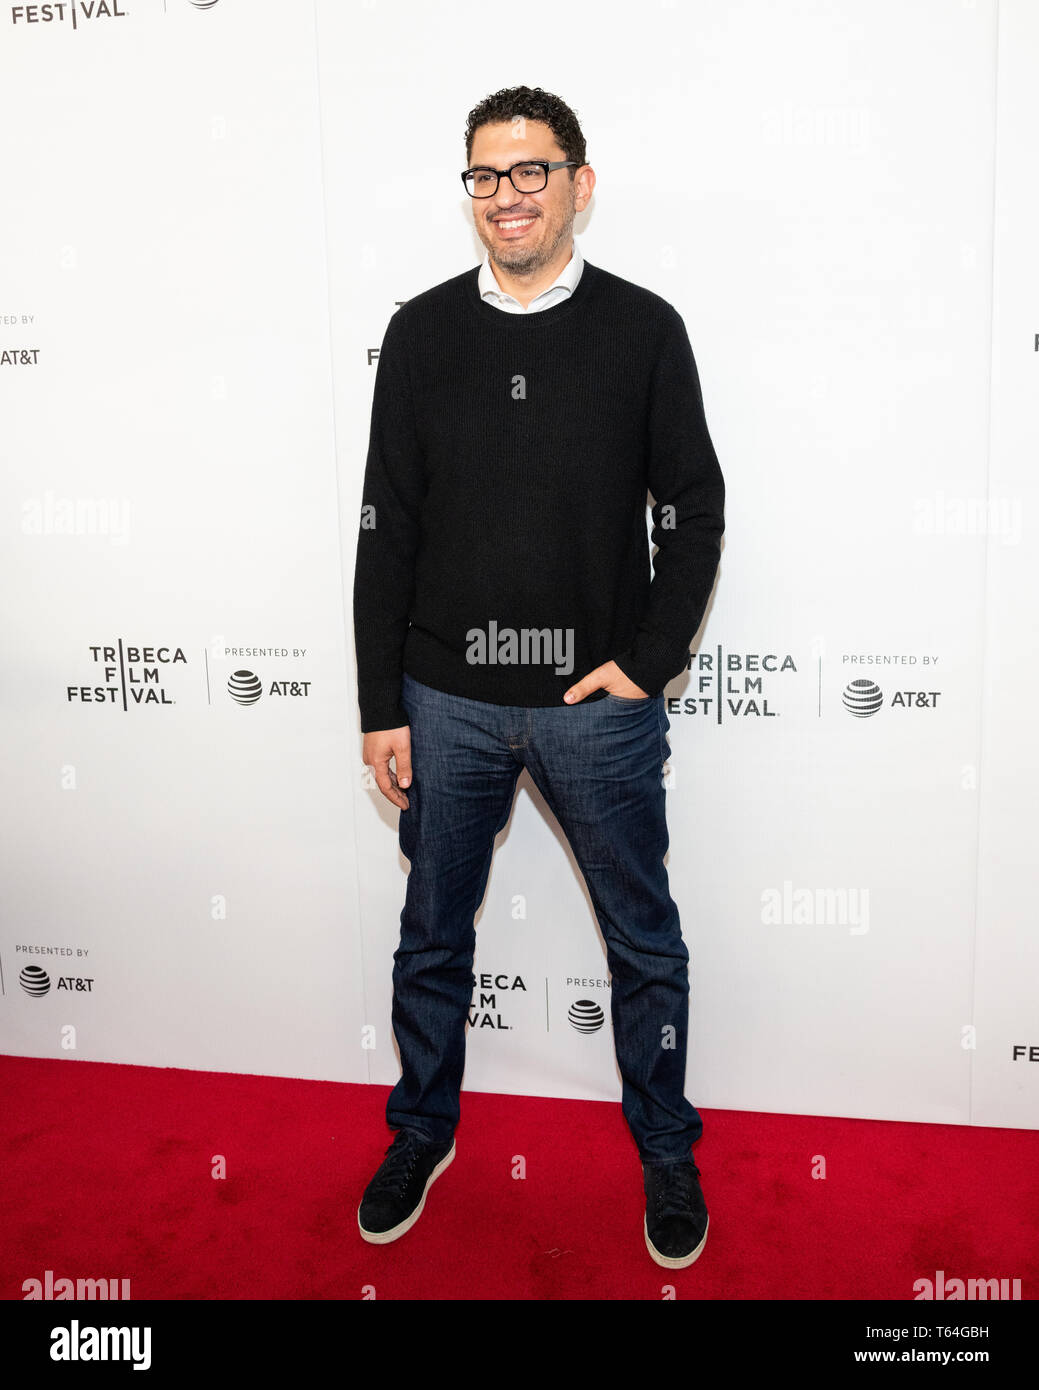 Sam Esmail at the Tribeca Film Festival red carpet arrivals for Tribeca Talks - 'A Farewell to Mr. Robot' at the 'Spring Studio - The Marriott Bonvoy Boundless Theater from Chase' in New York City. Stock Photo